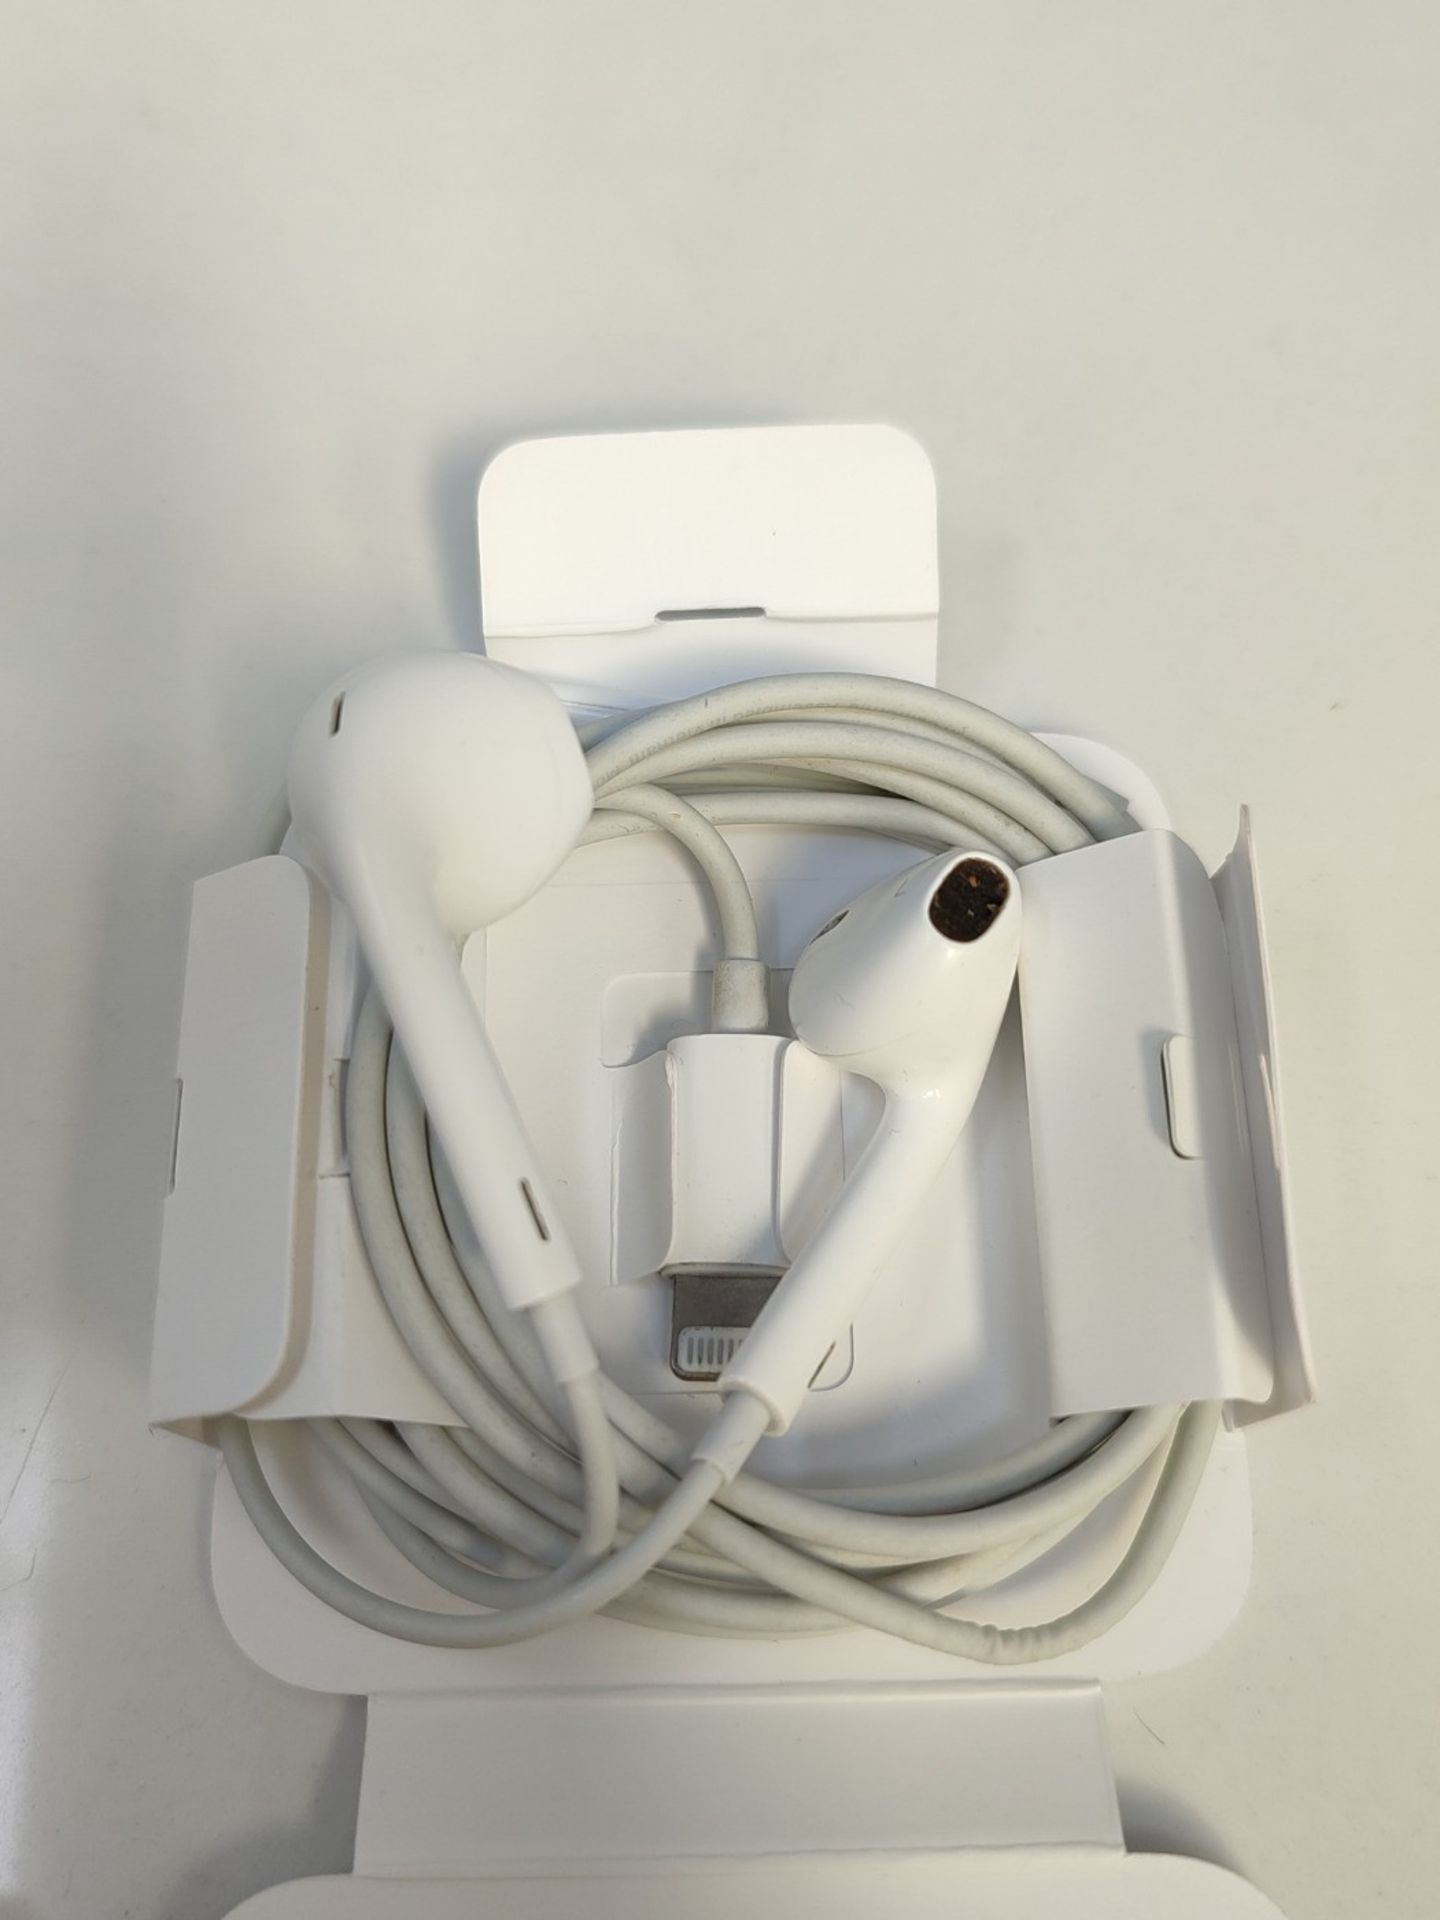 Apple EarPods with Lightning connector - Image 3 of 3